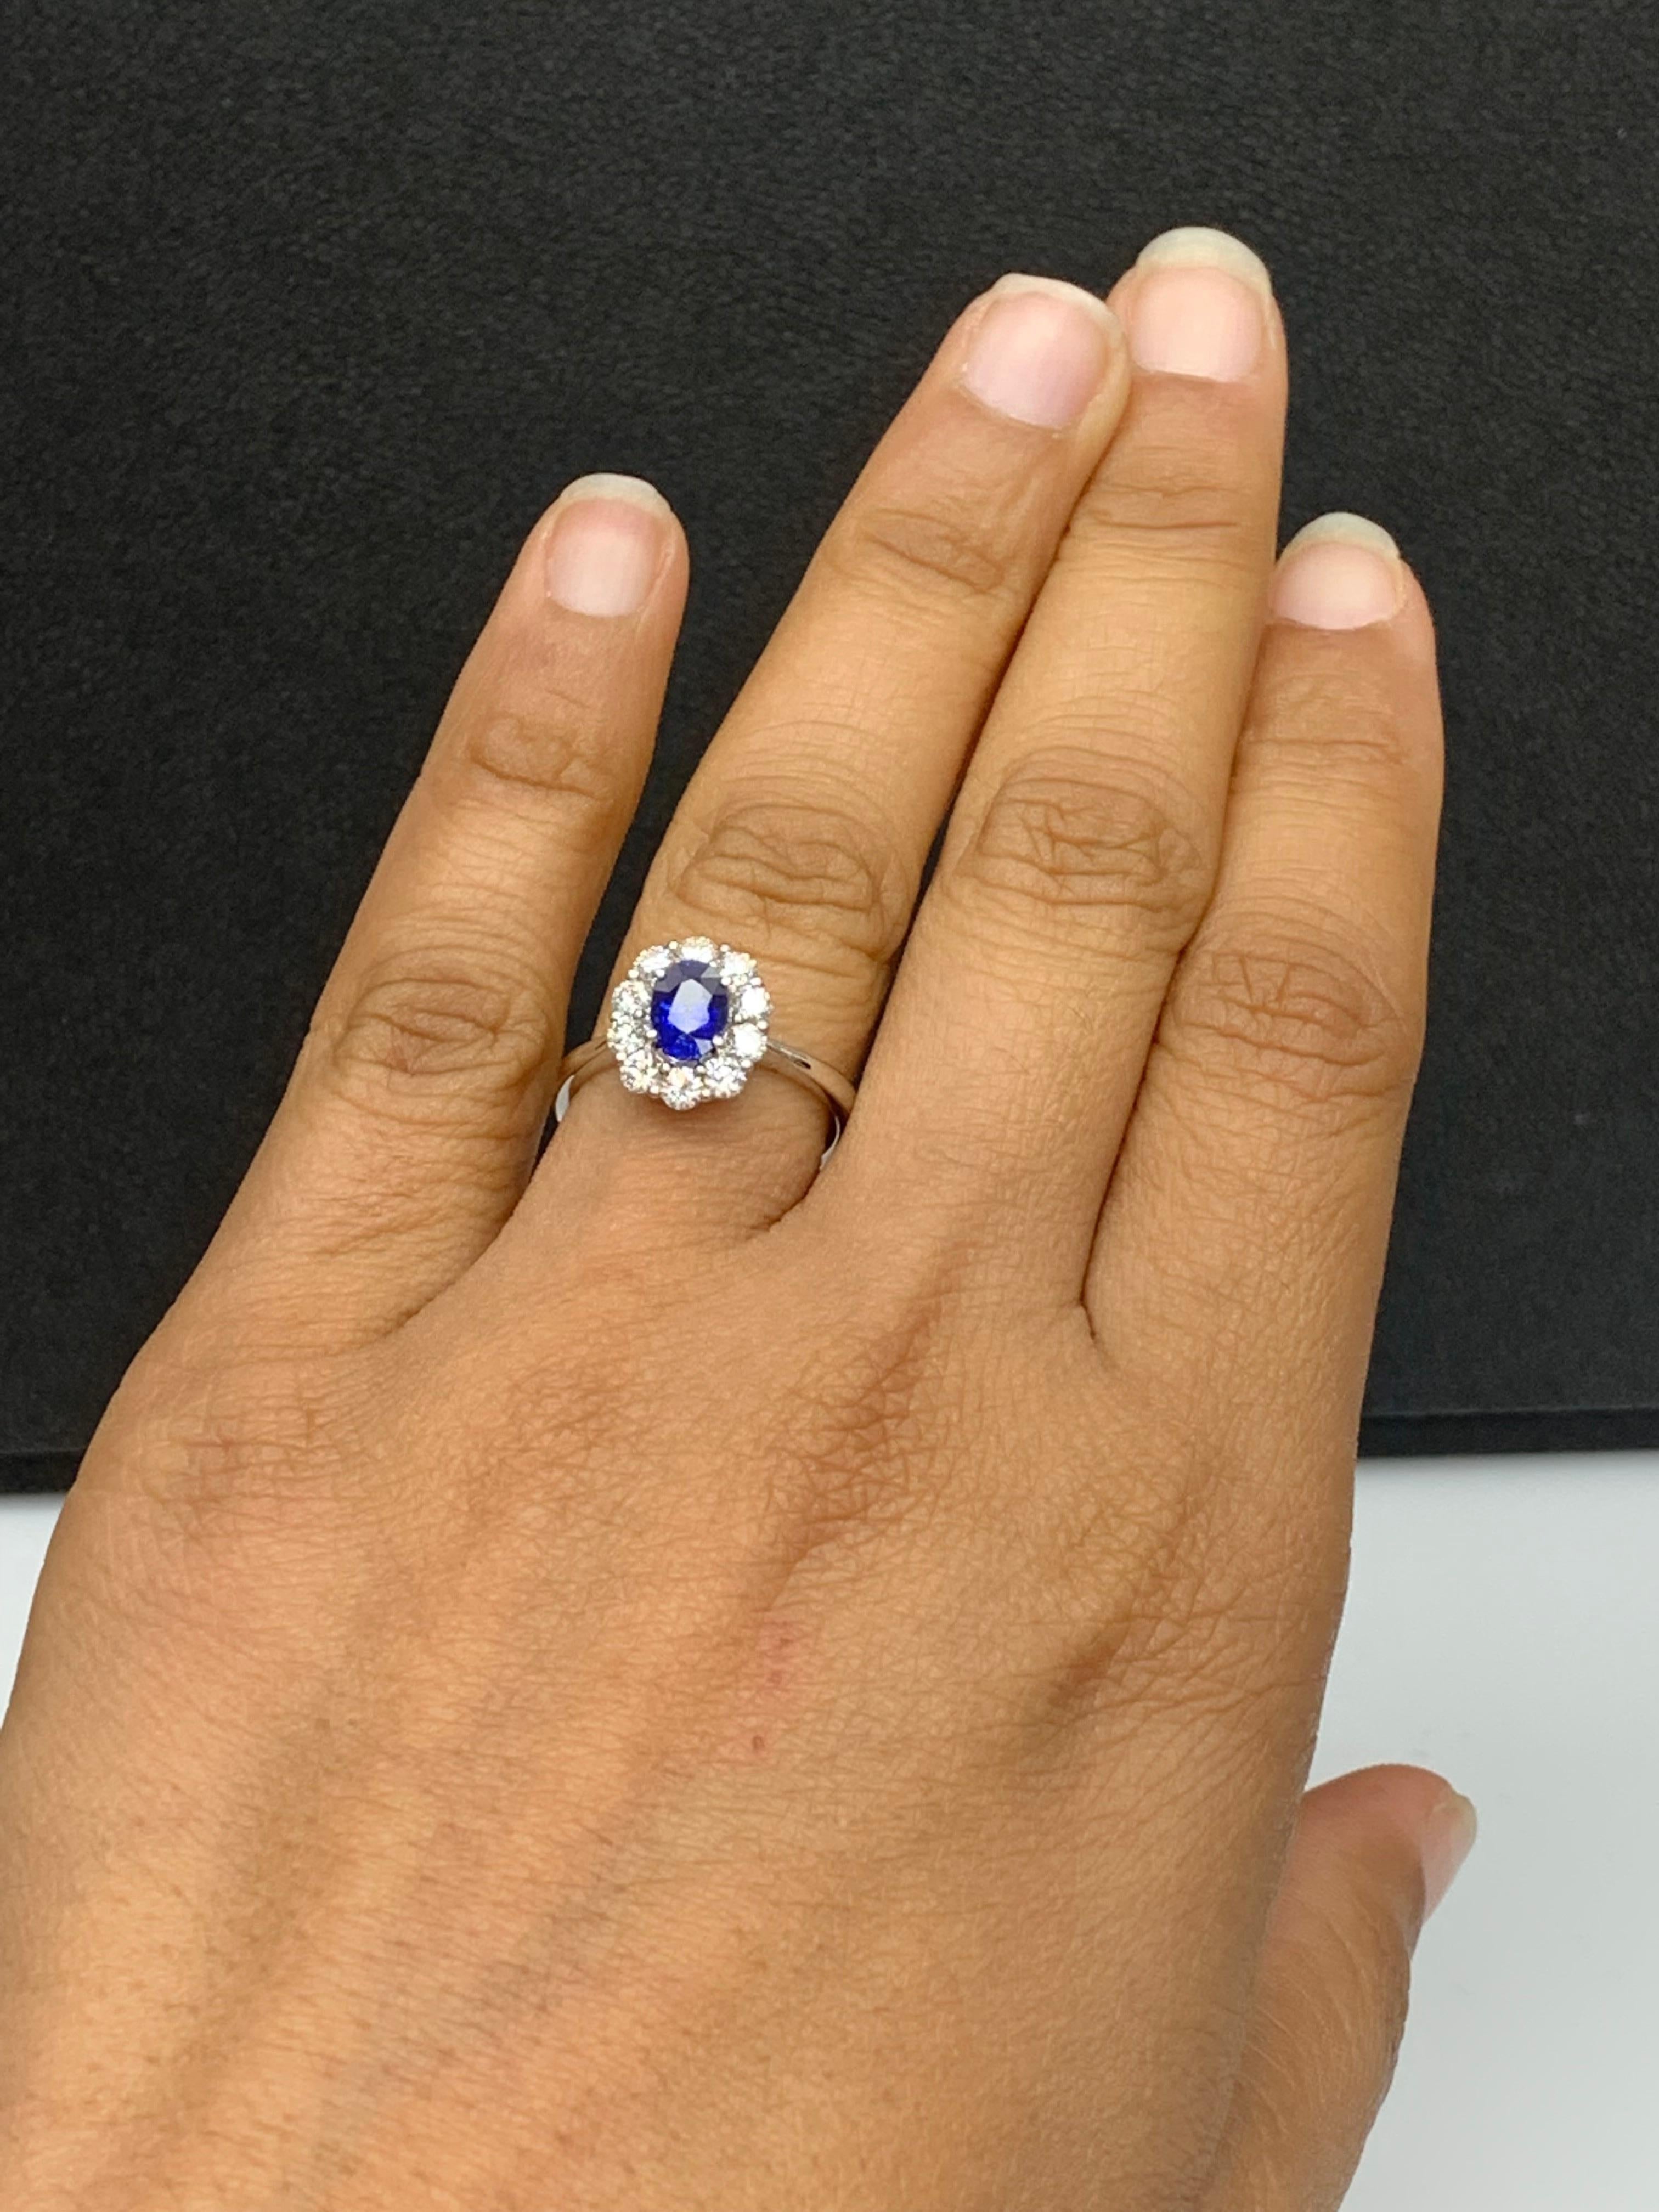 0.91 Carat Oval Cut Blue Sapphire and Diamond Ring in 18k White Gold For Sale 1